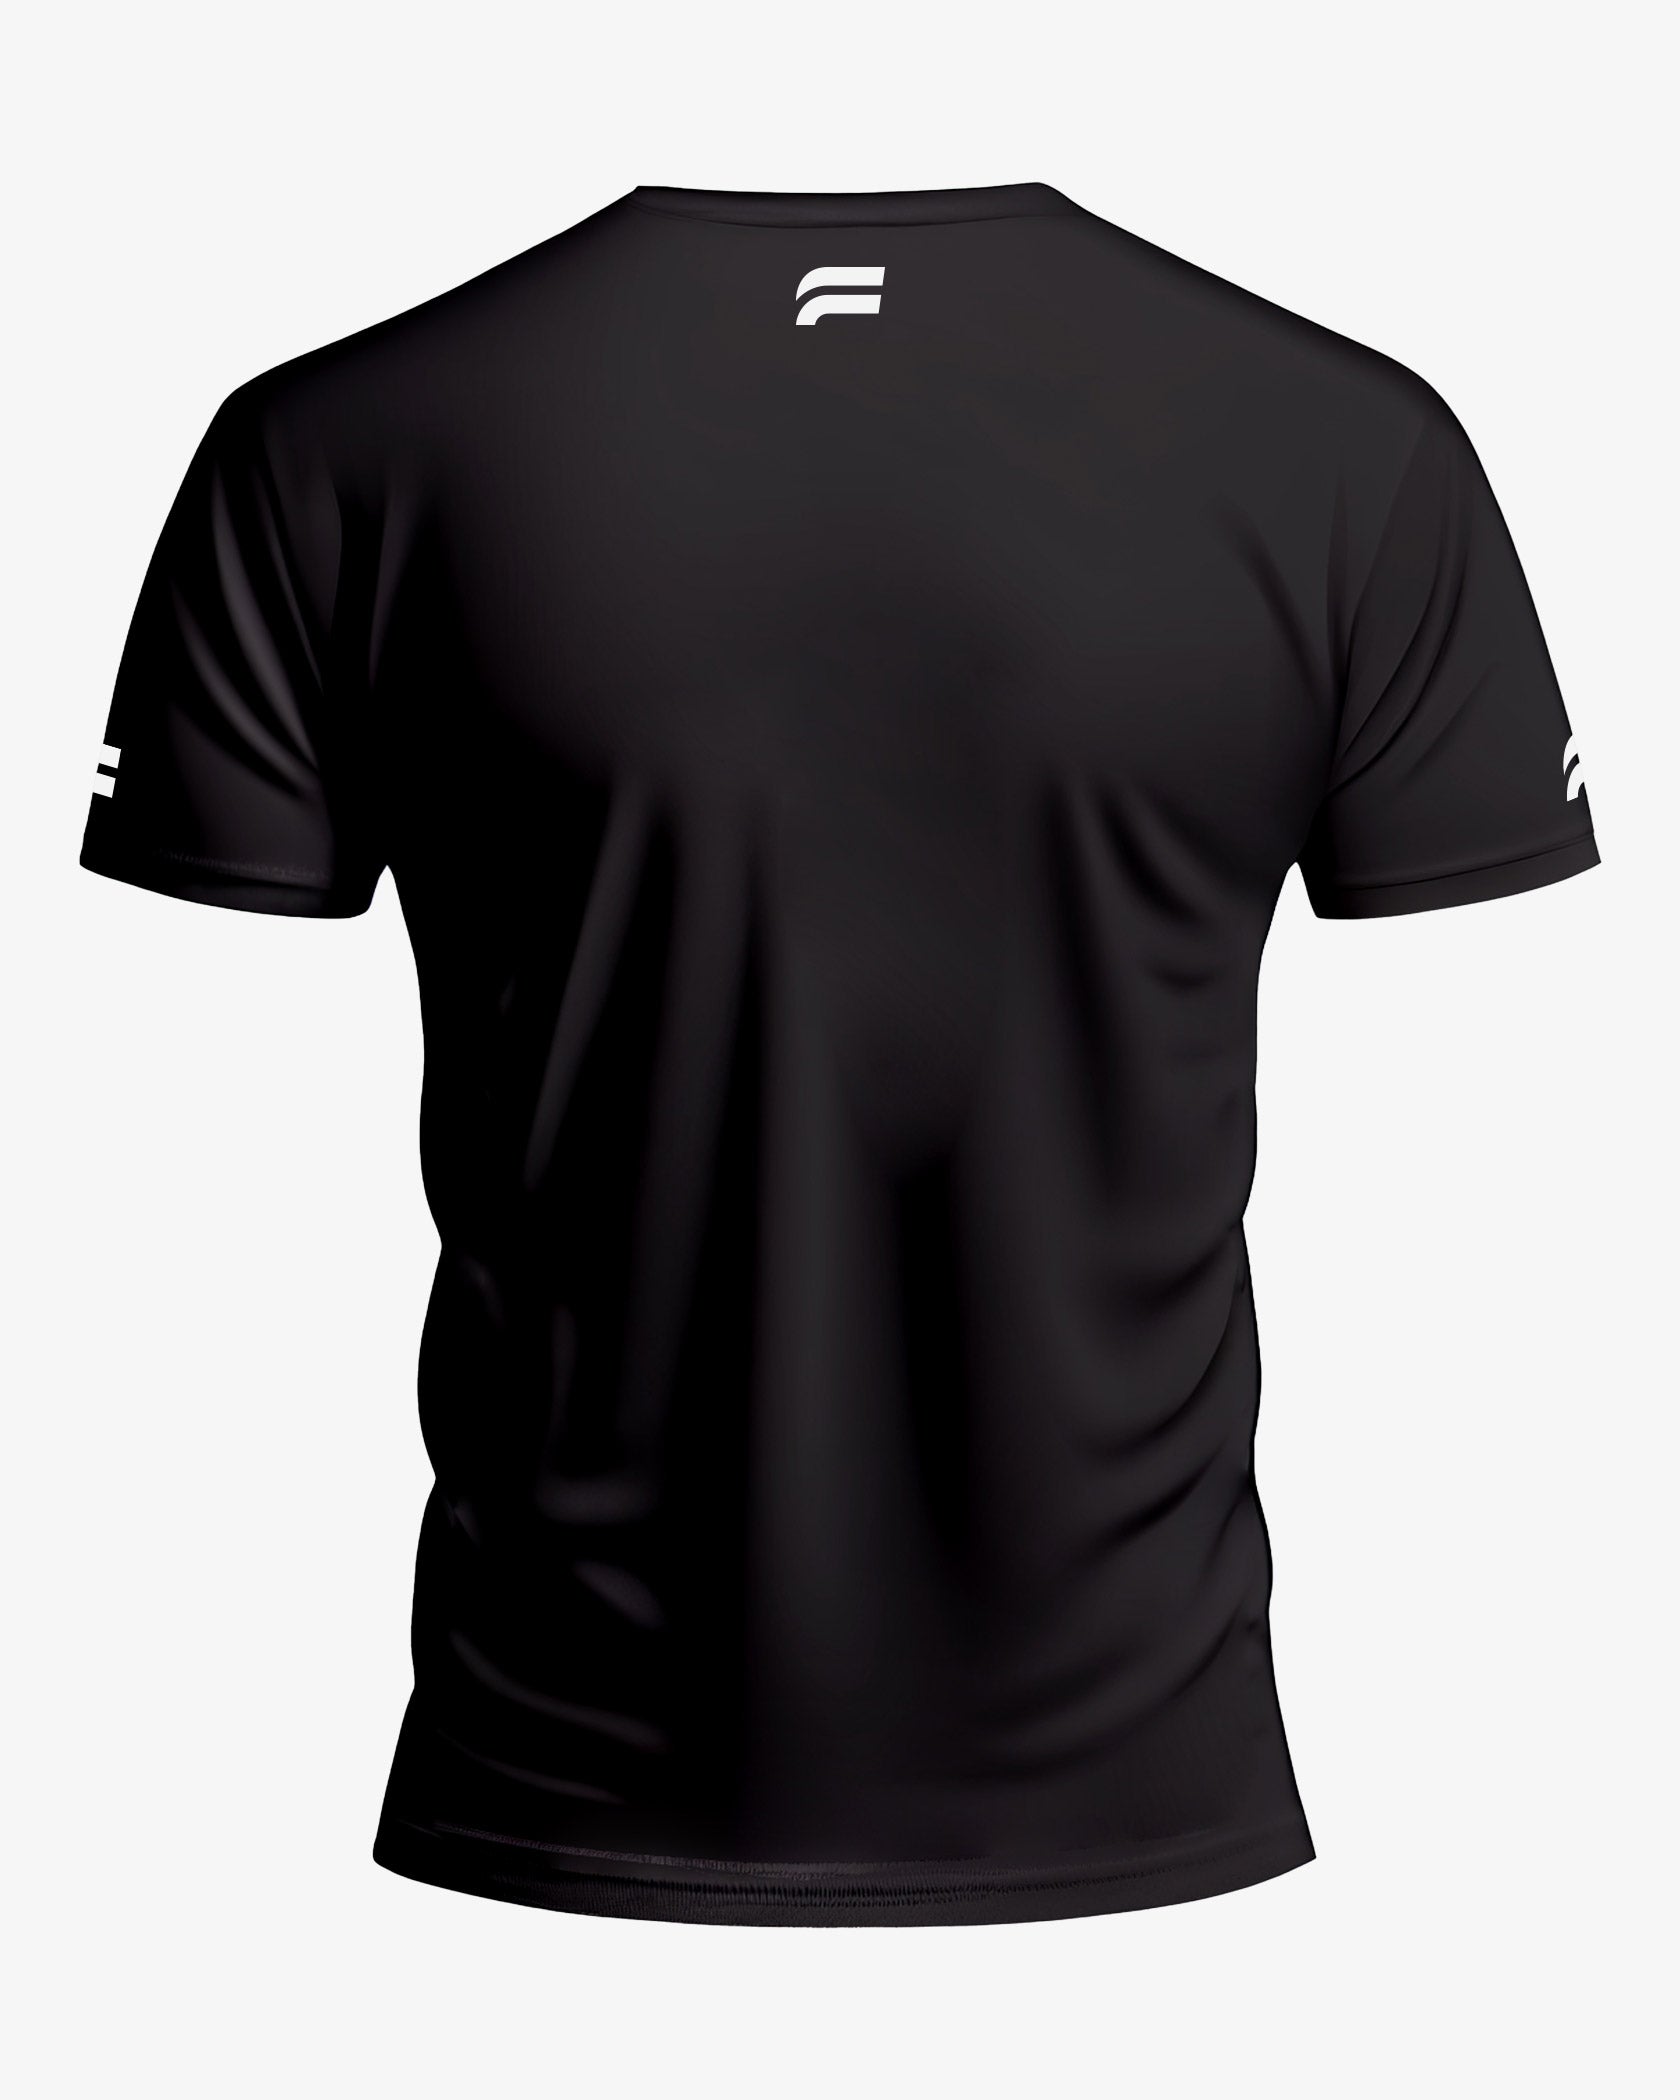 Competition T-Shirt - Black